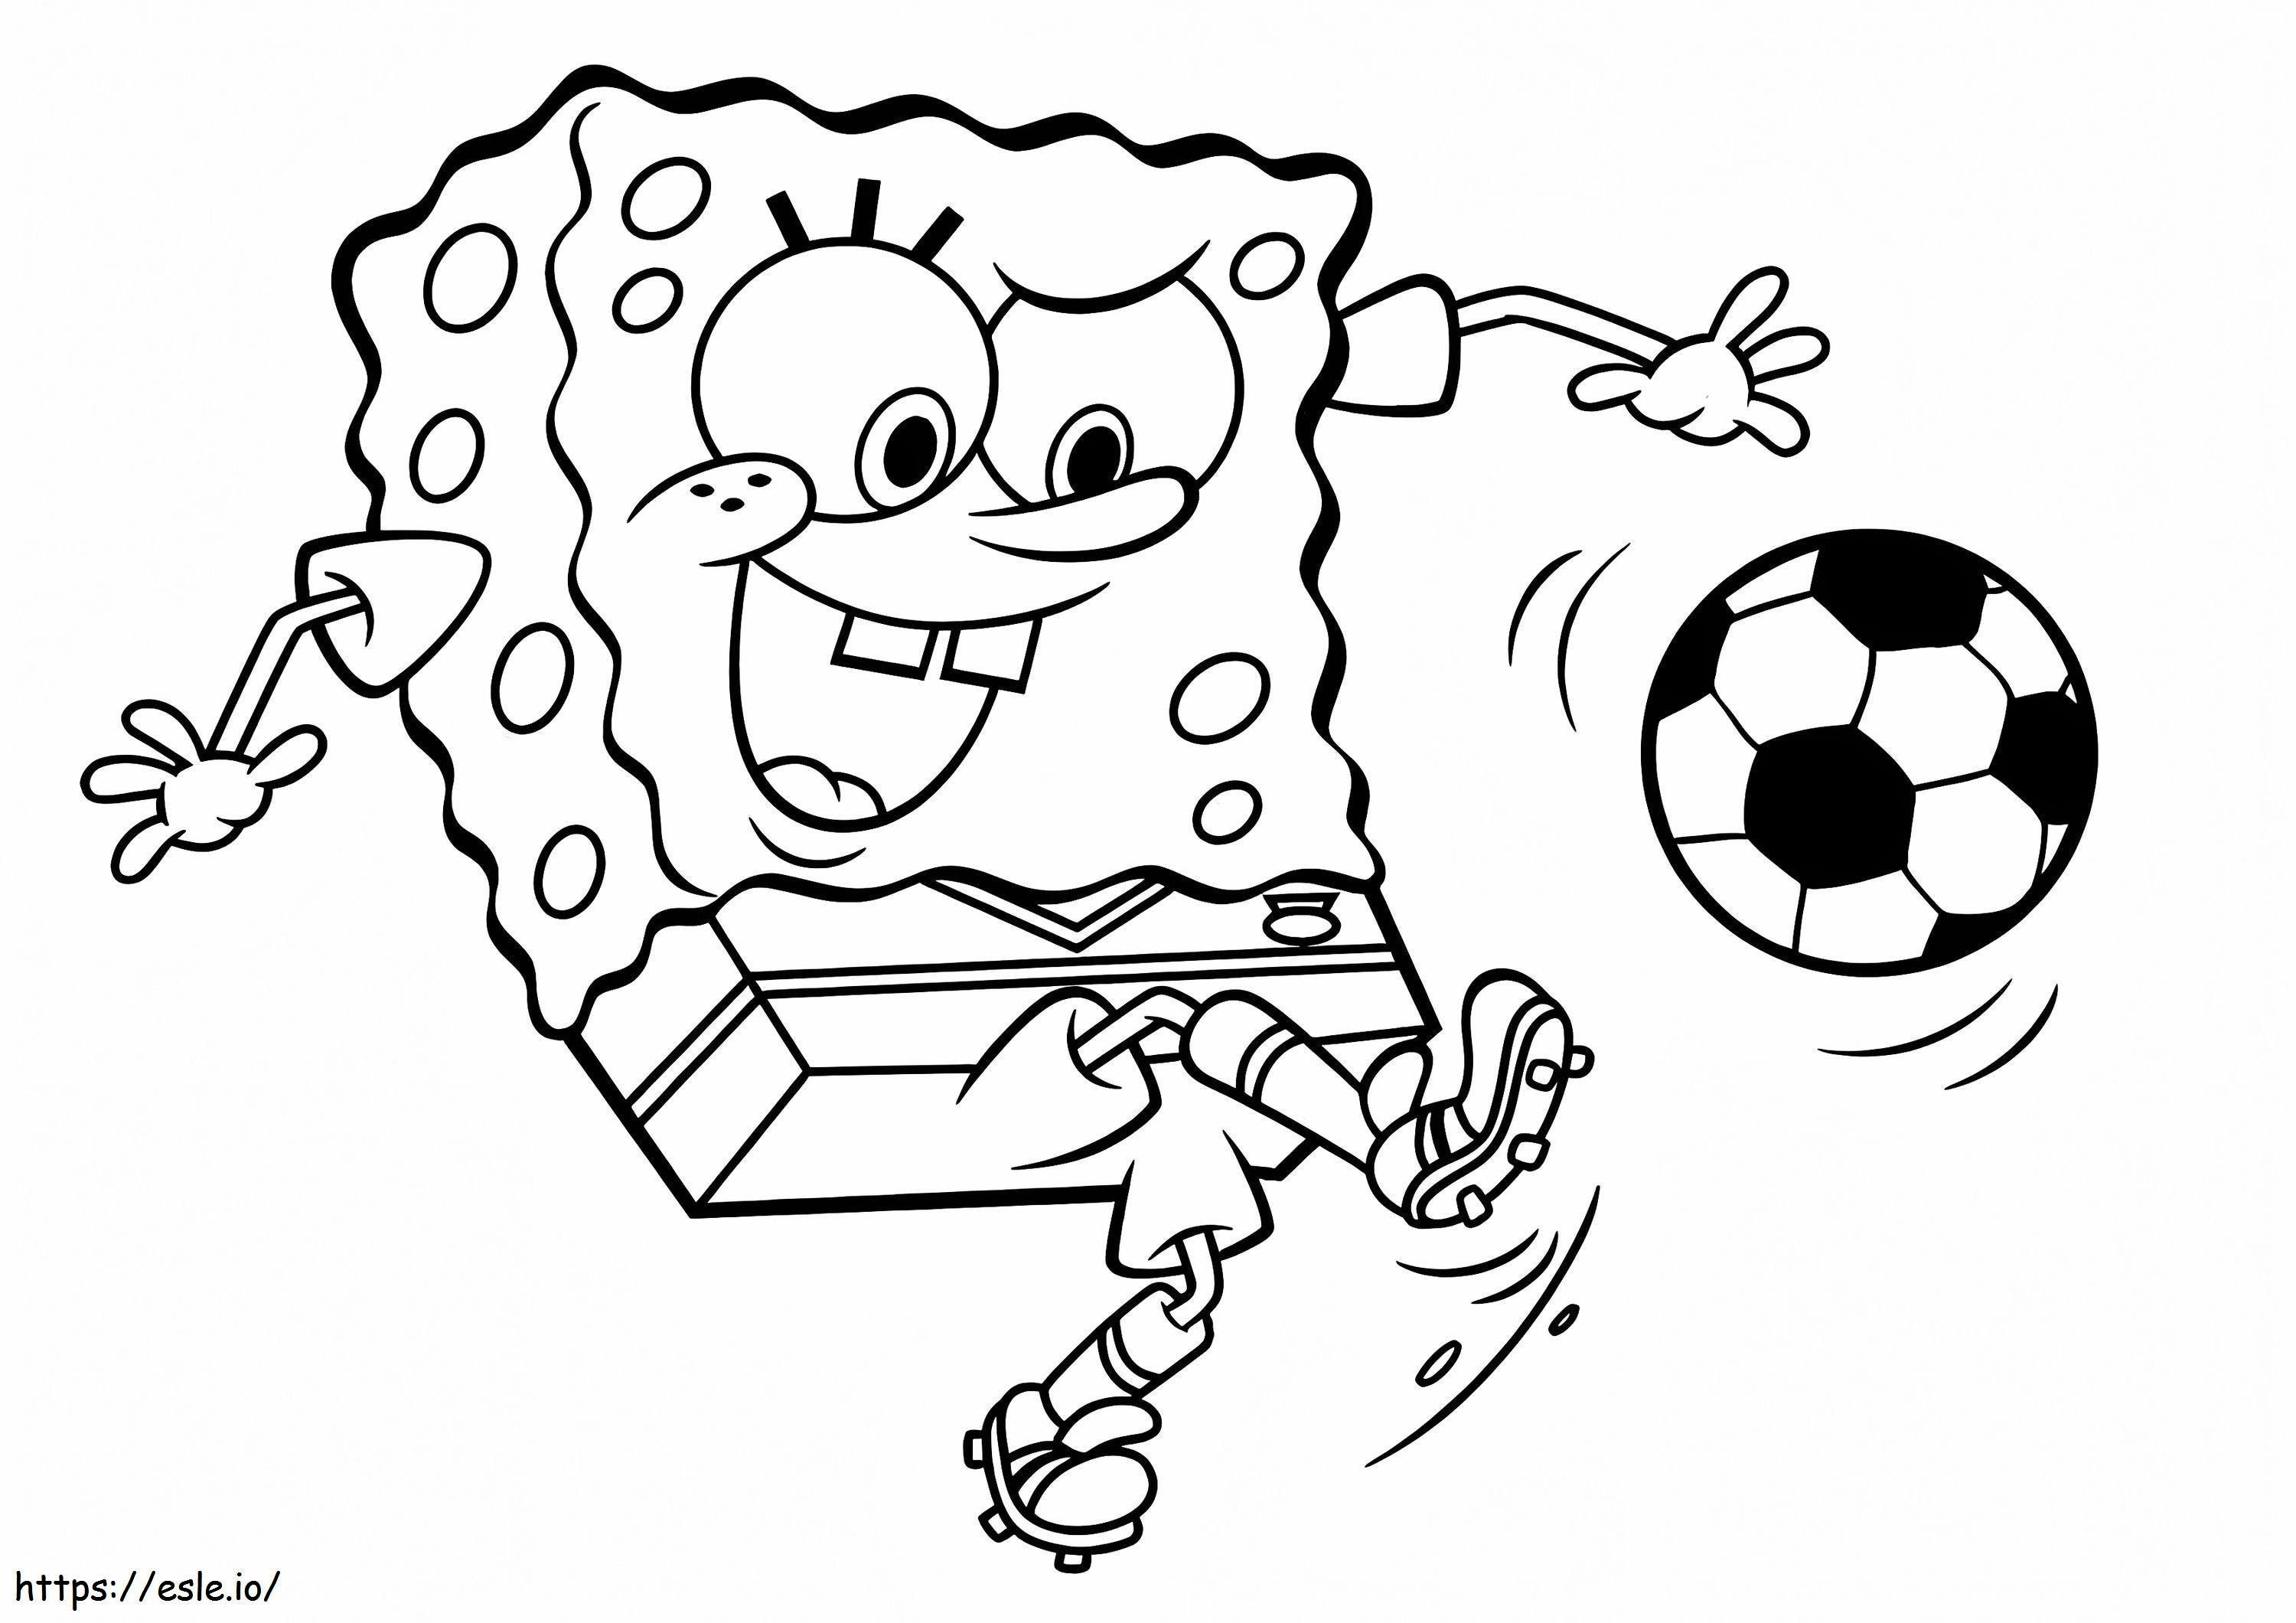 SpongeBob Playing Soccer coloring page